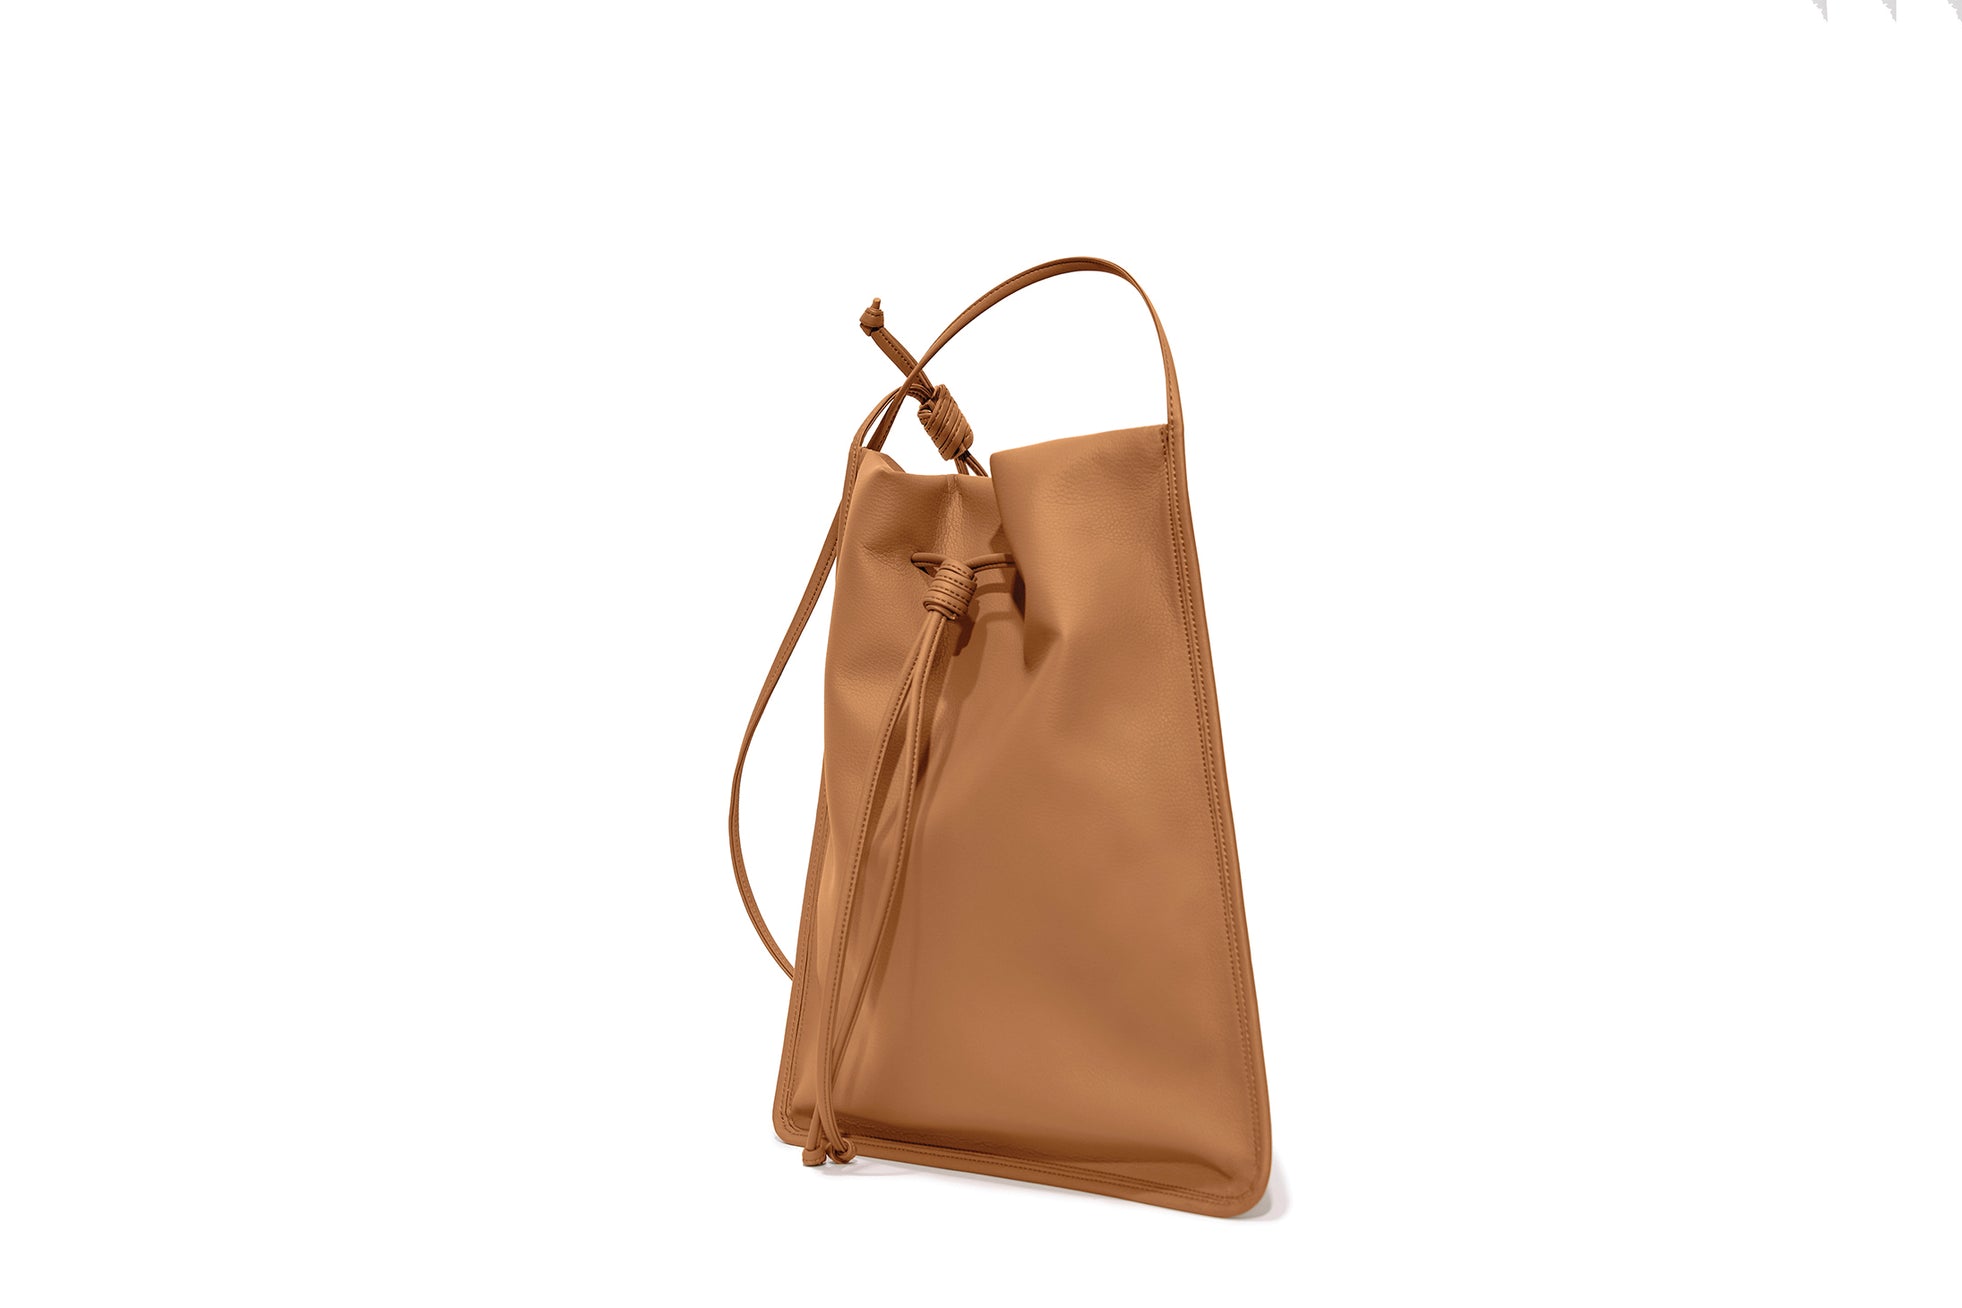 The Sac in Banbū Leather in Caramel image 3